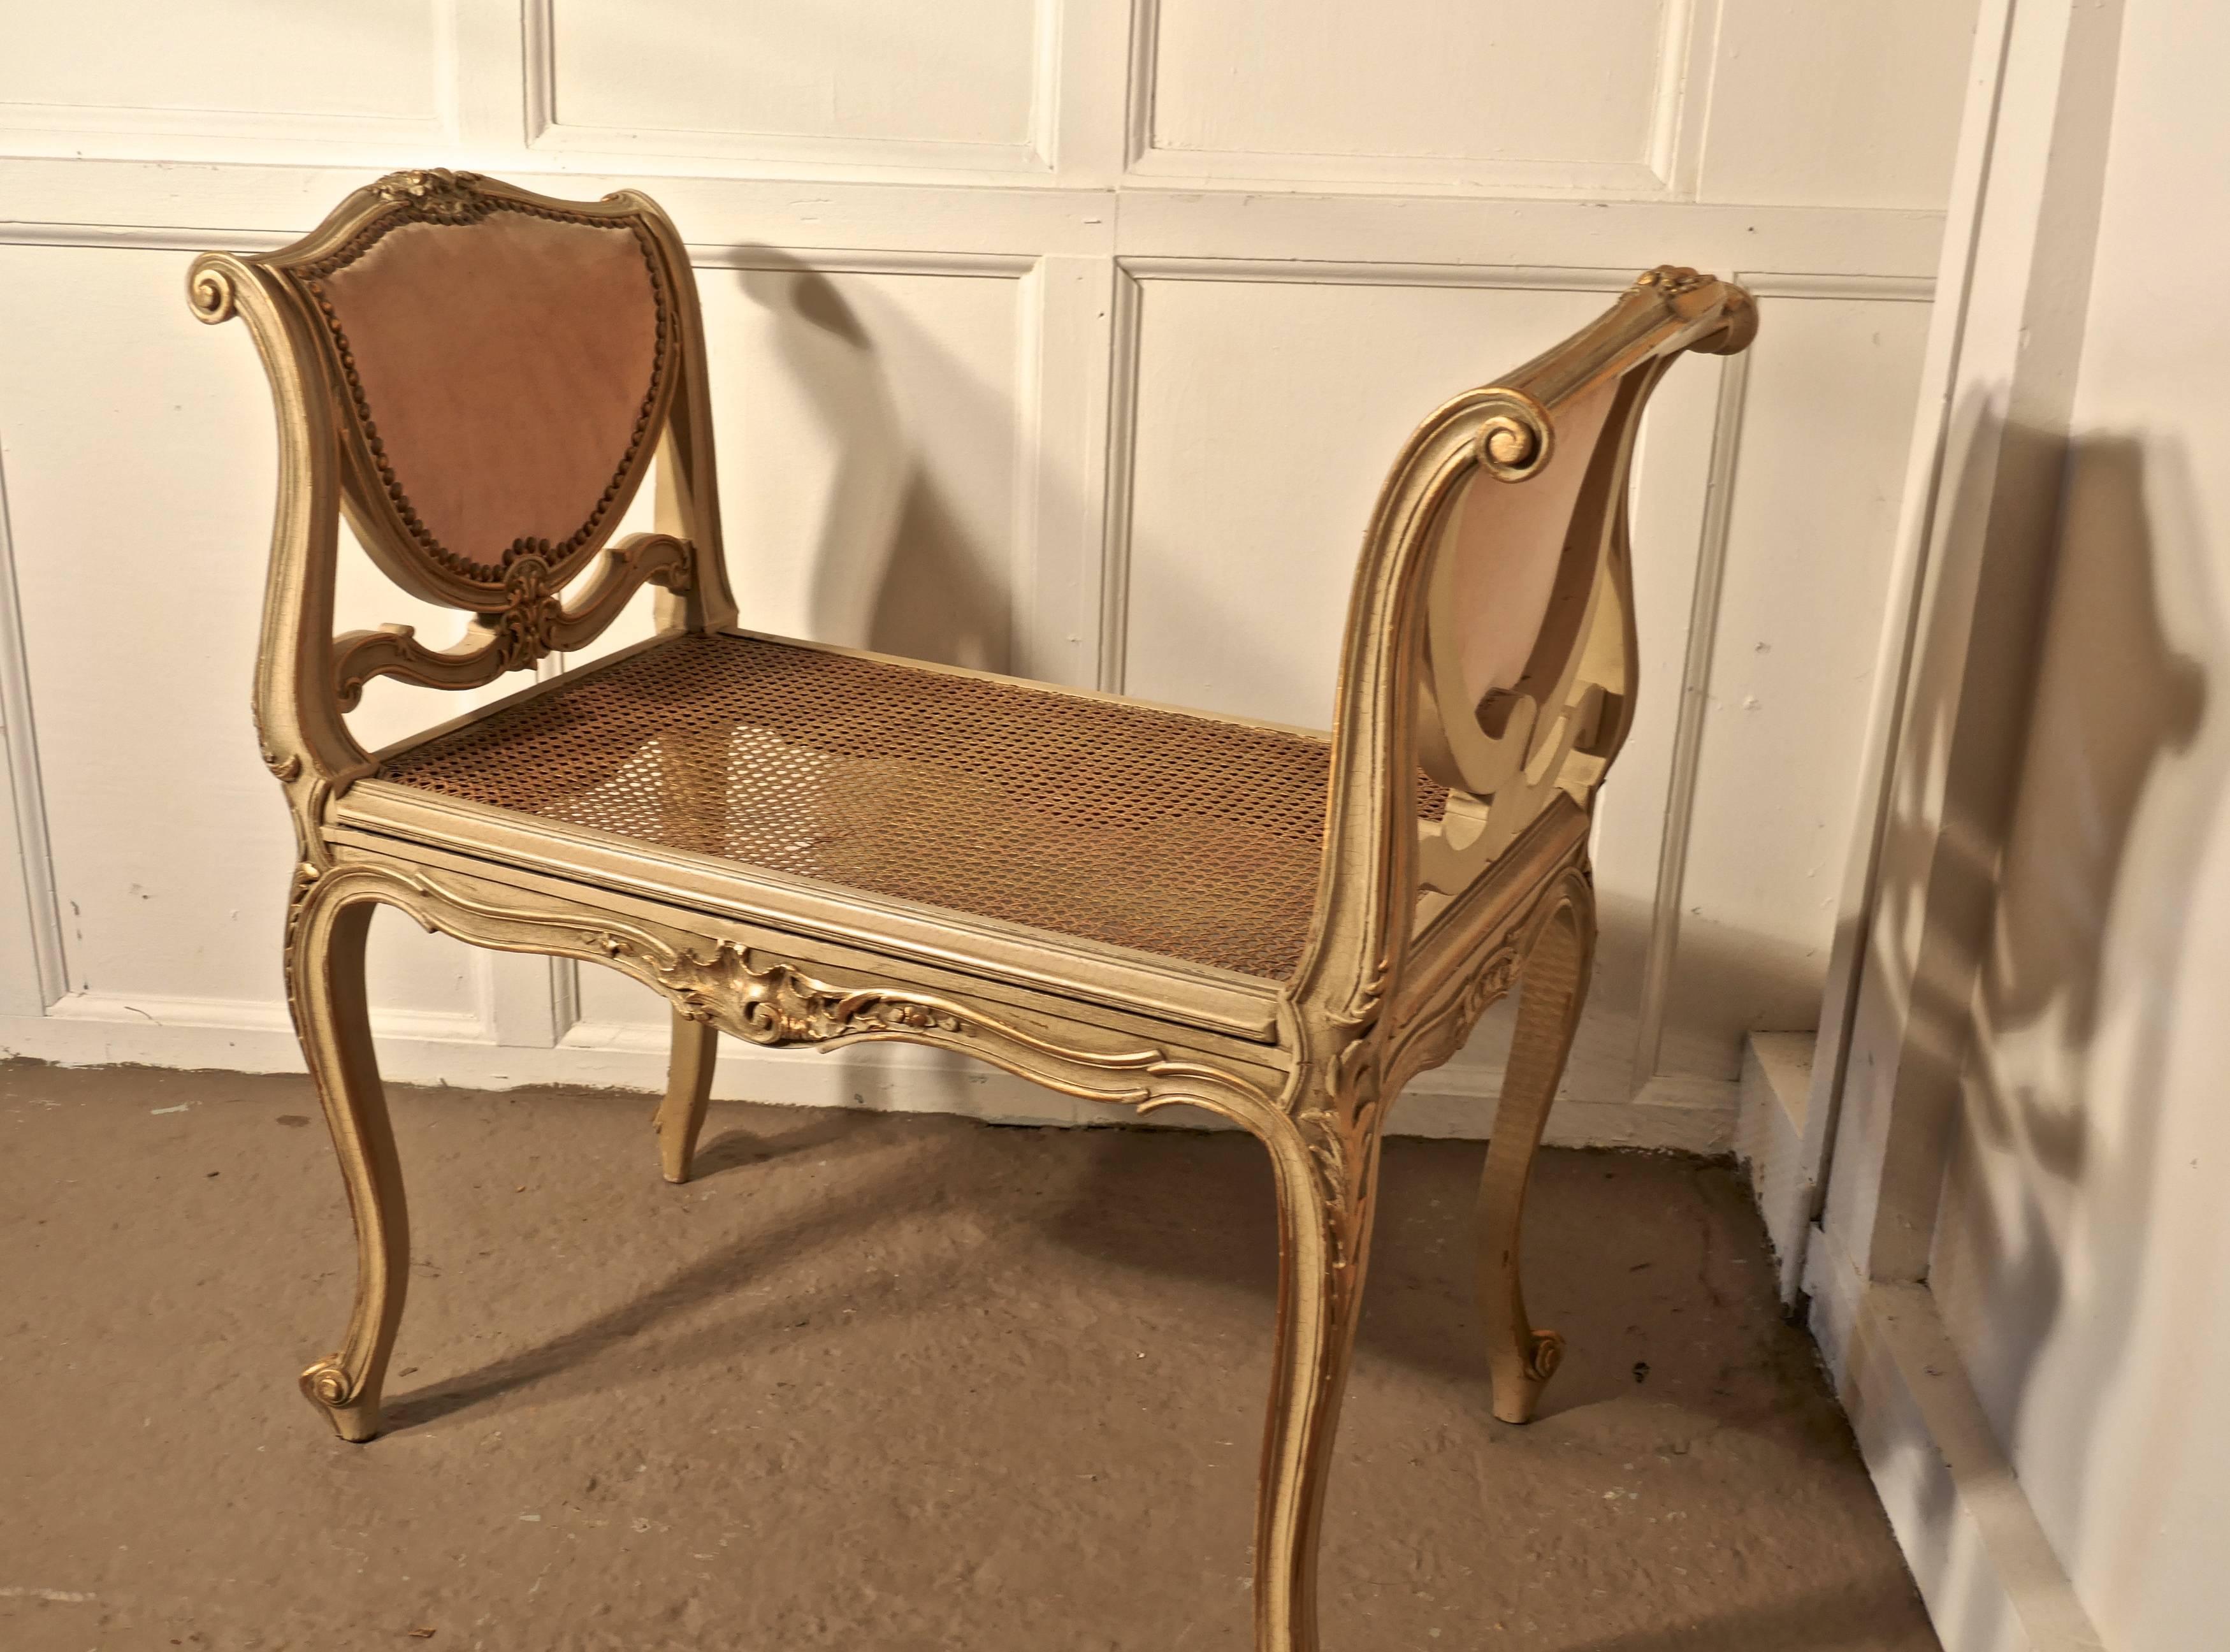 A French Louis Philippe painted and gilt boudoir window seat

This is a delightful piece of Louis style painted chic furniture, the high arms on either side has heart shaped panels upholstered in dusky pink velour
The painted legs, arms and apron